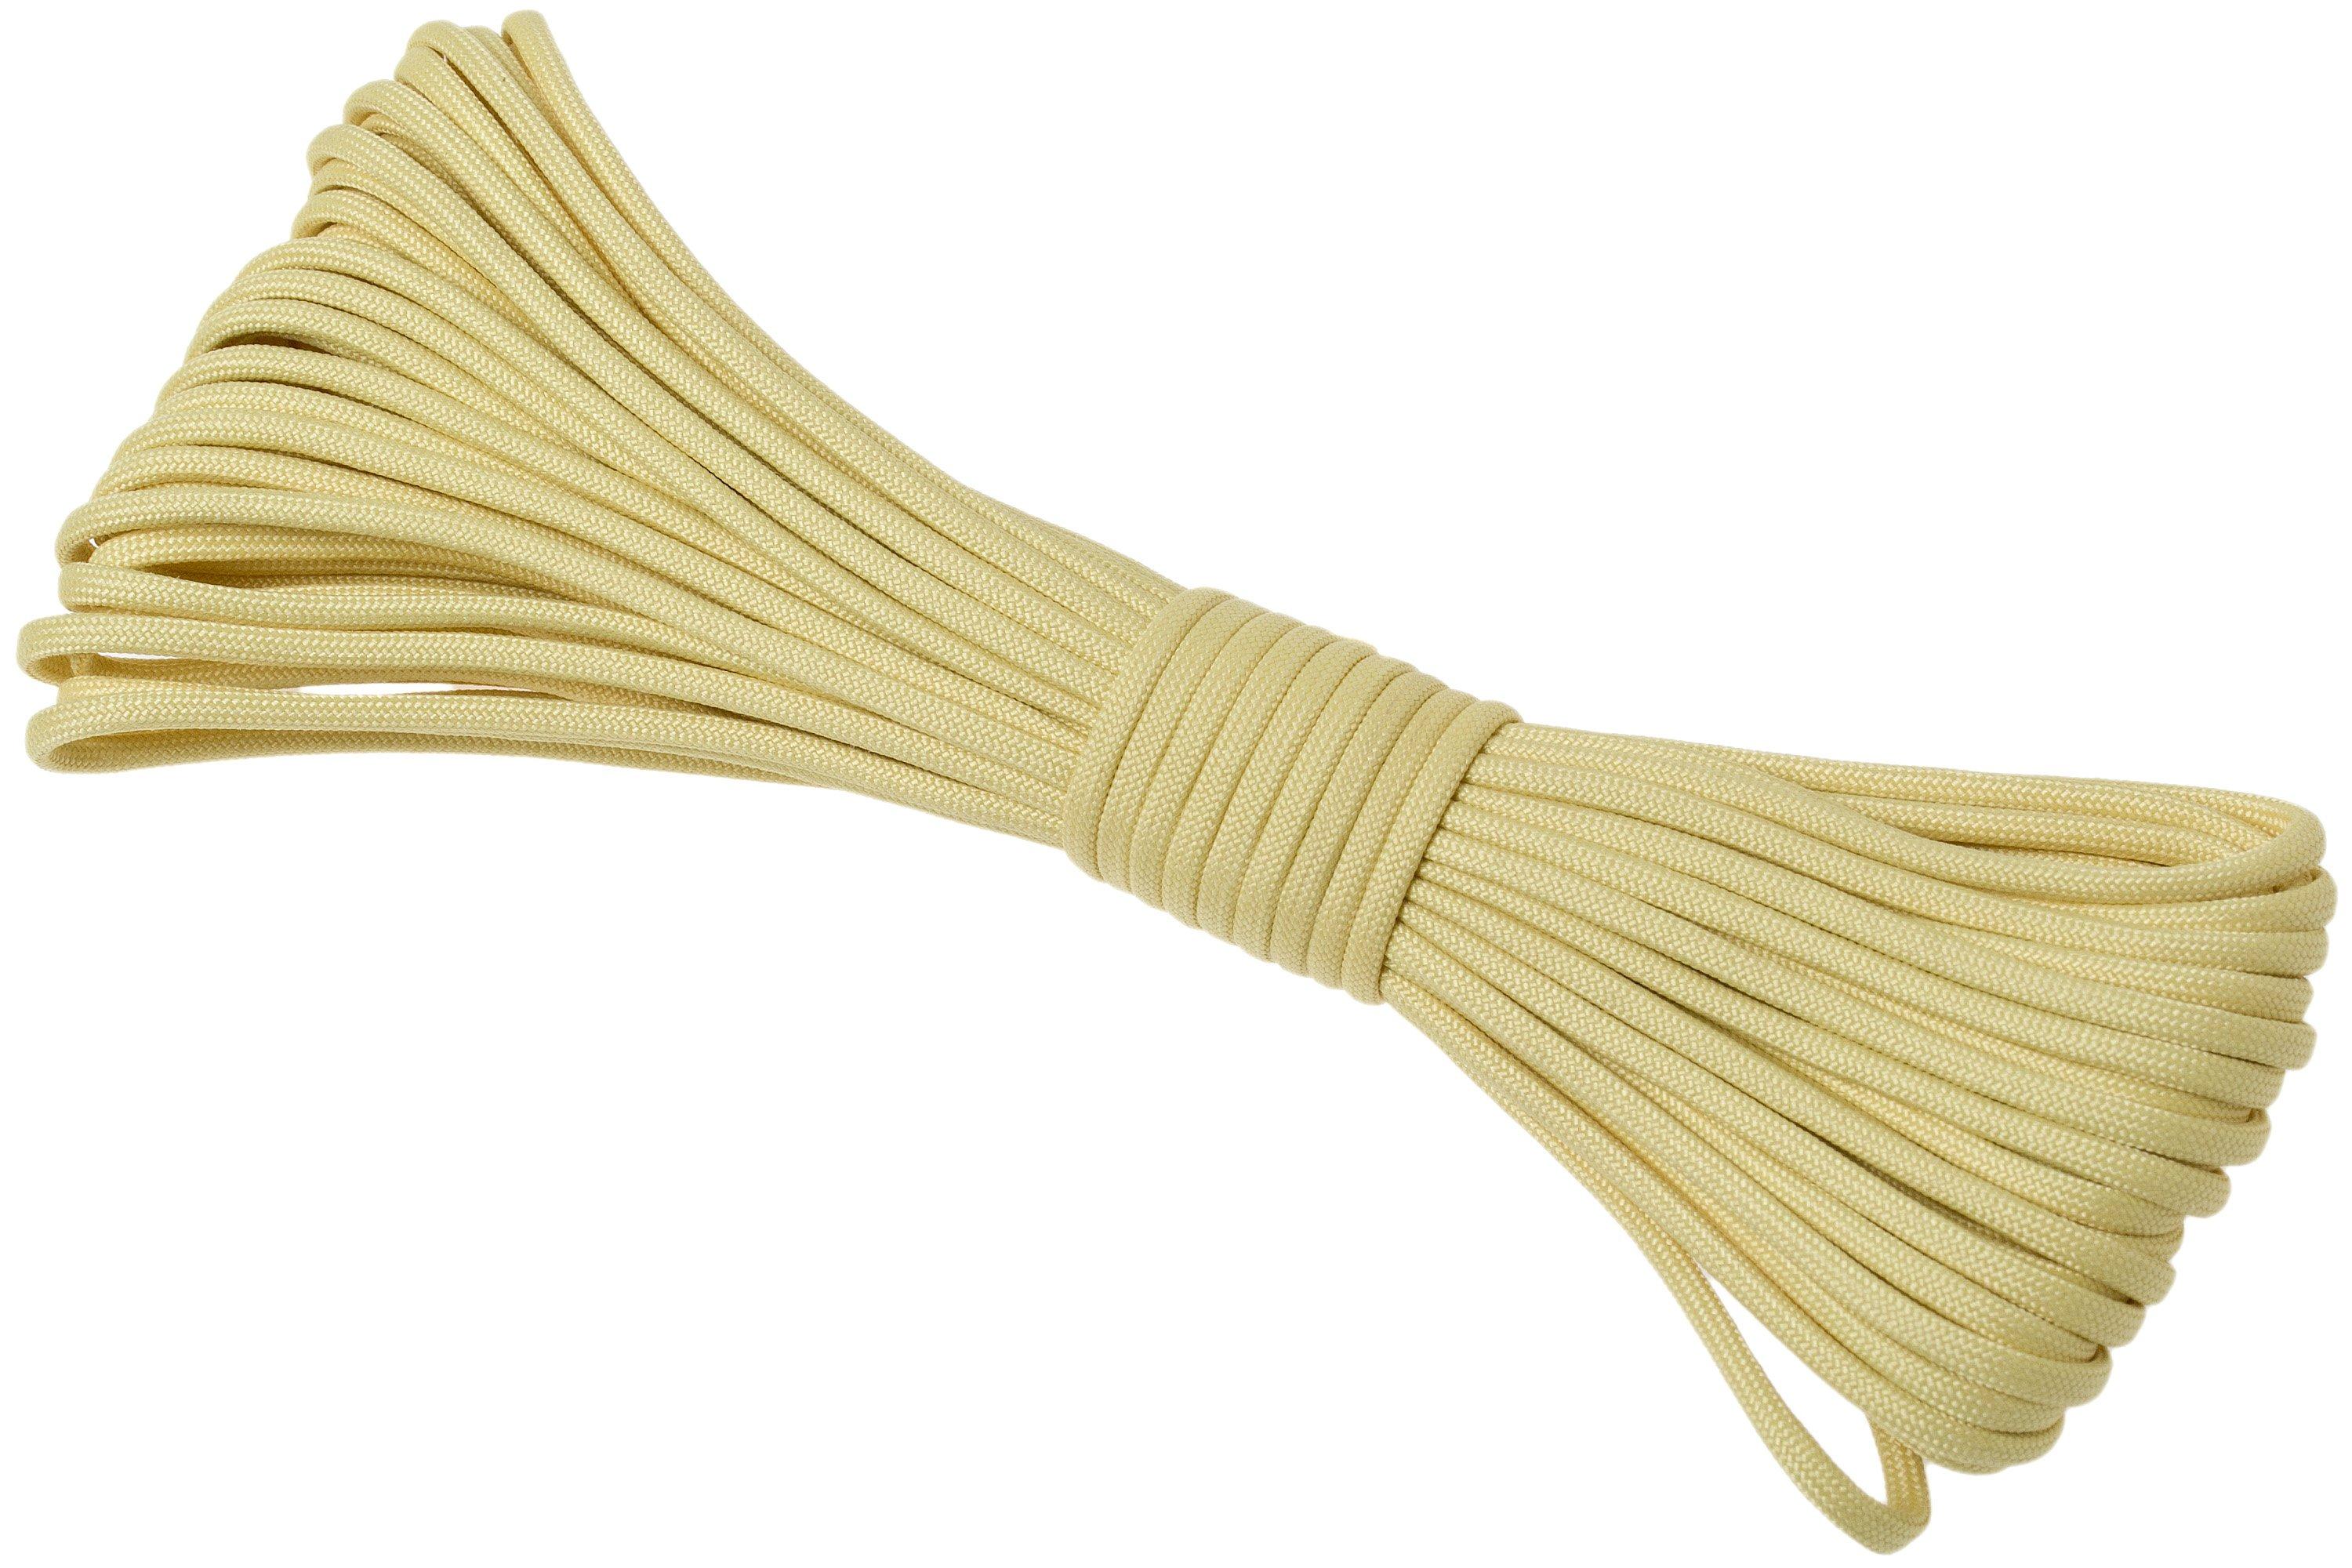 Atwood Rope MFG Kevlar Paracord, colour: yellow, 50 ft (15.24m